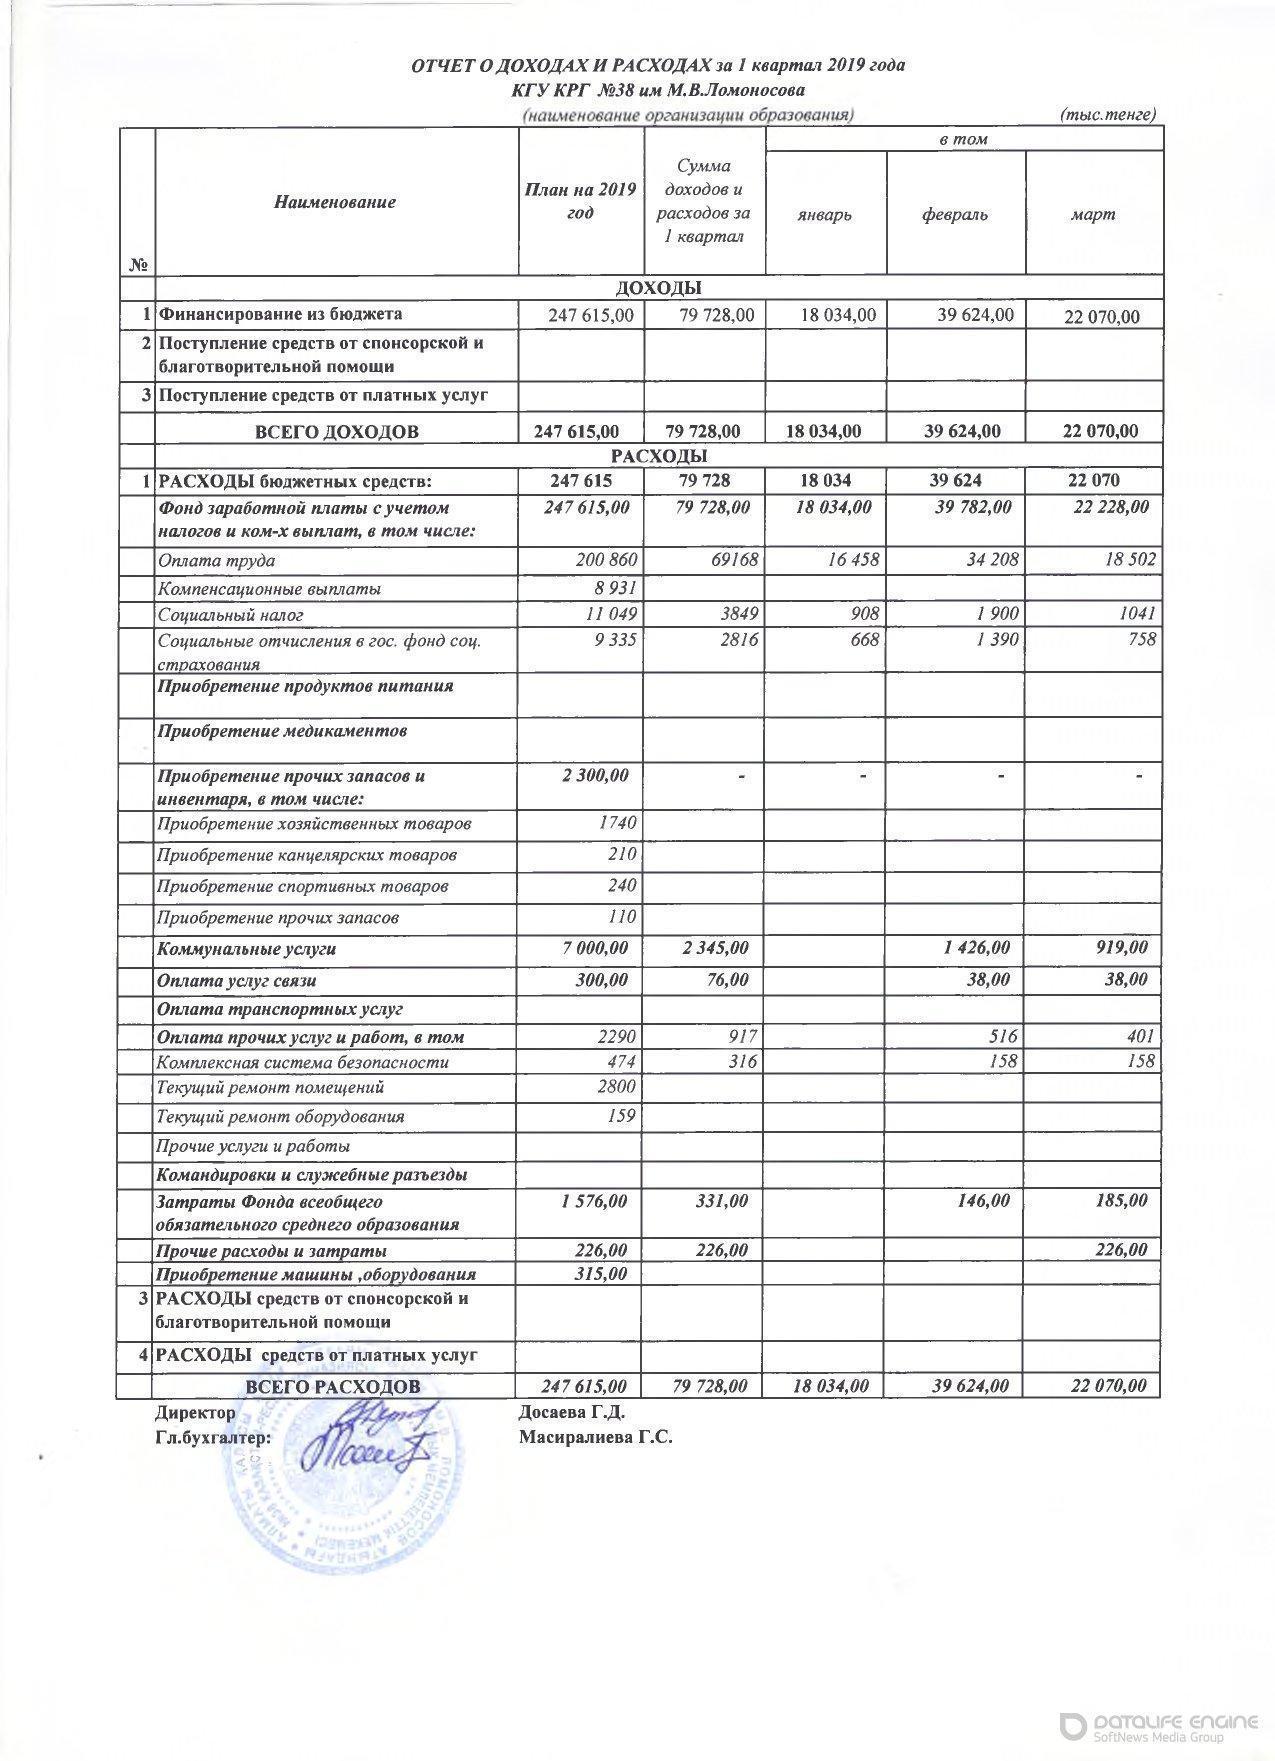 Statement of income and expenses за 1 квартал 2019